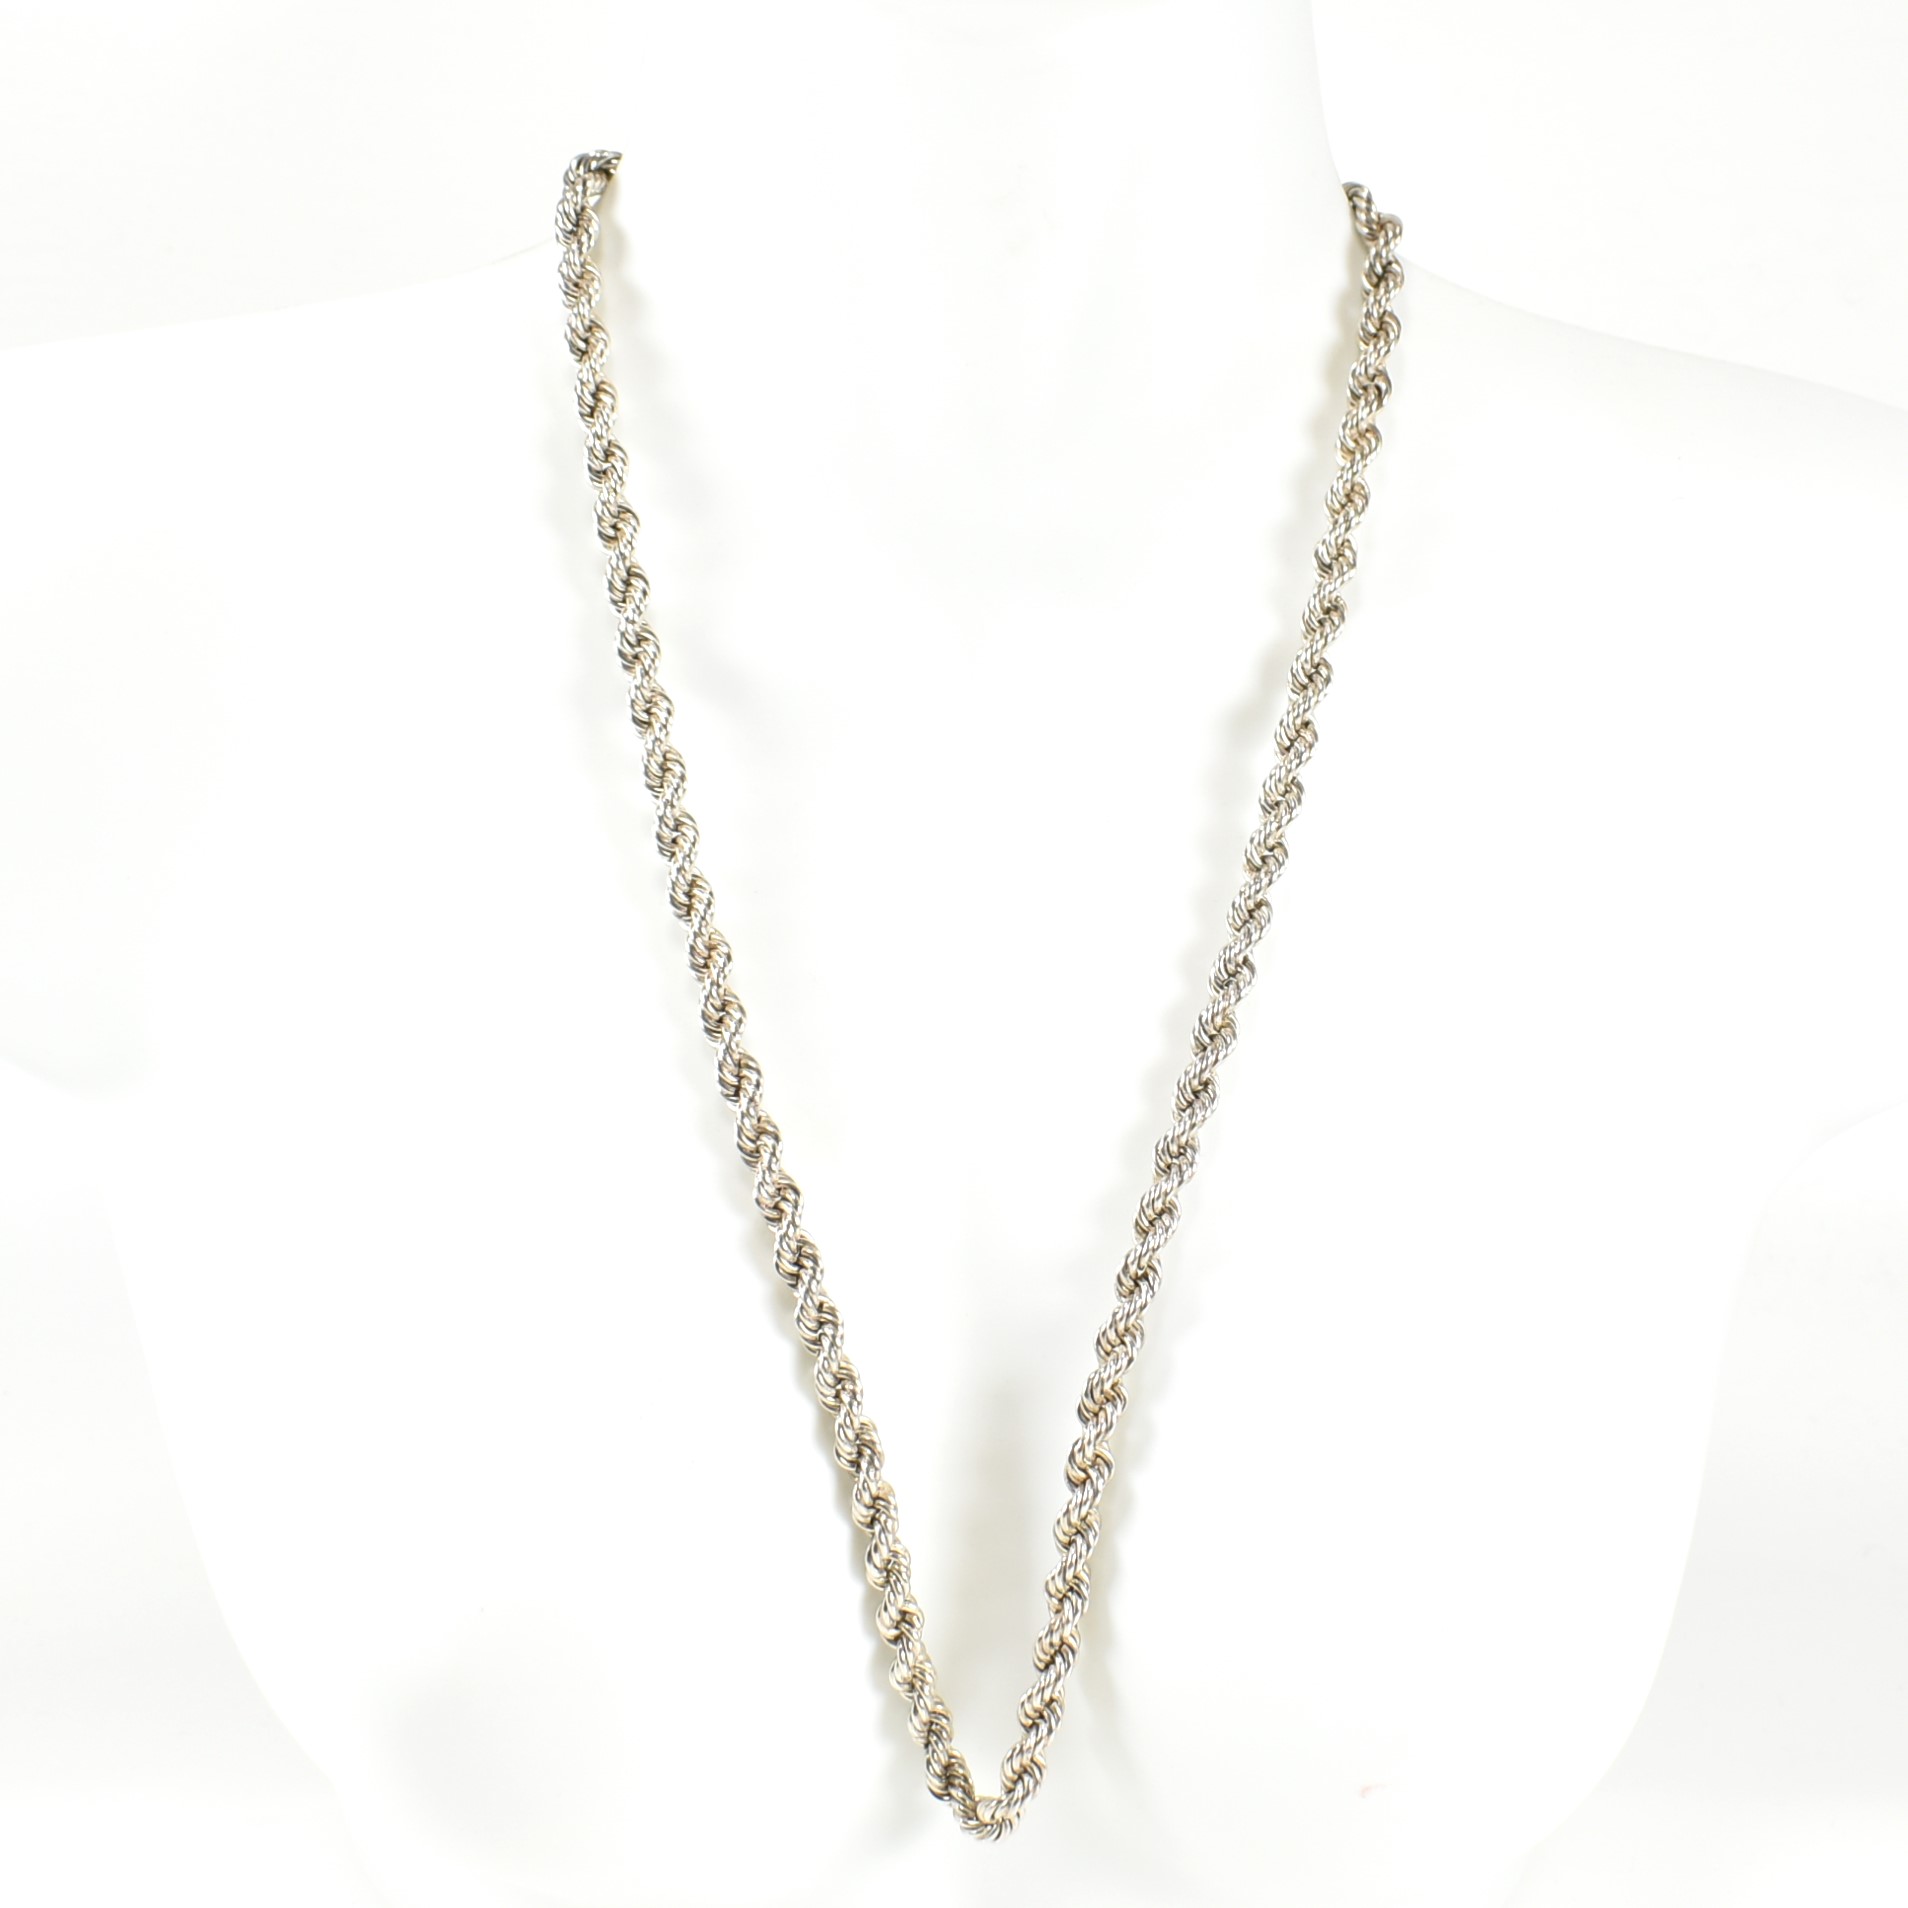 SILVER TWISTED ROPE CHAIN NECKLACE - Image 4 of 4